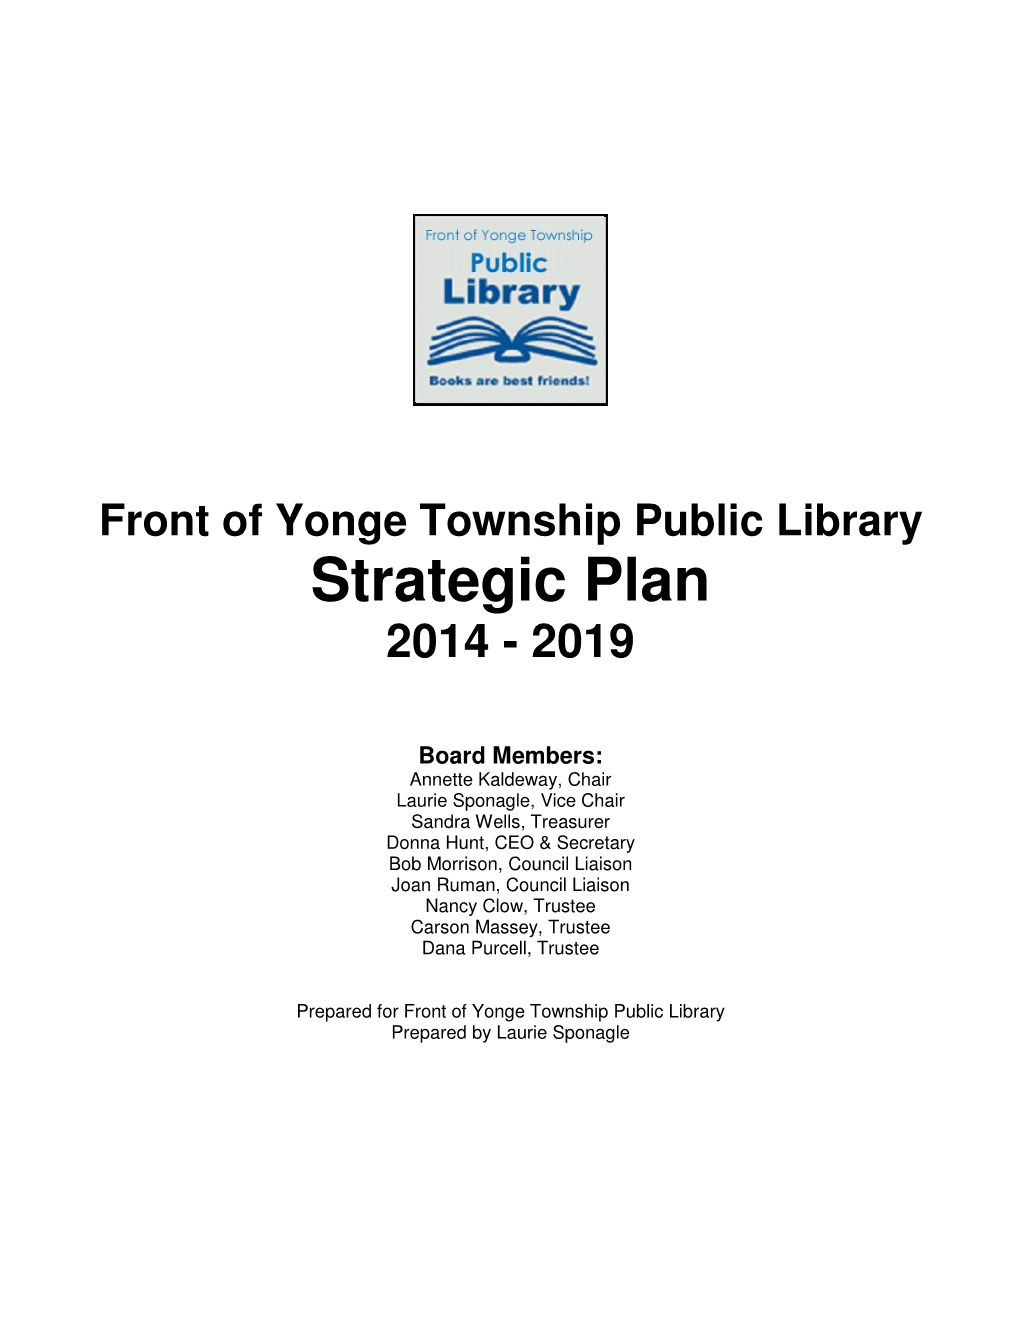 Front of Yonge Library Strategic Plan